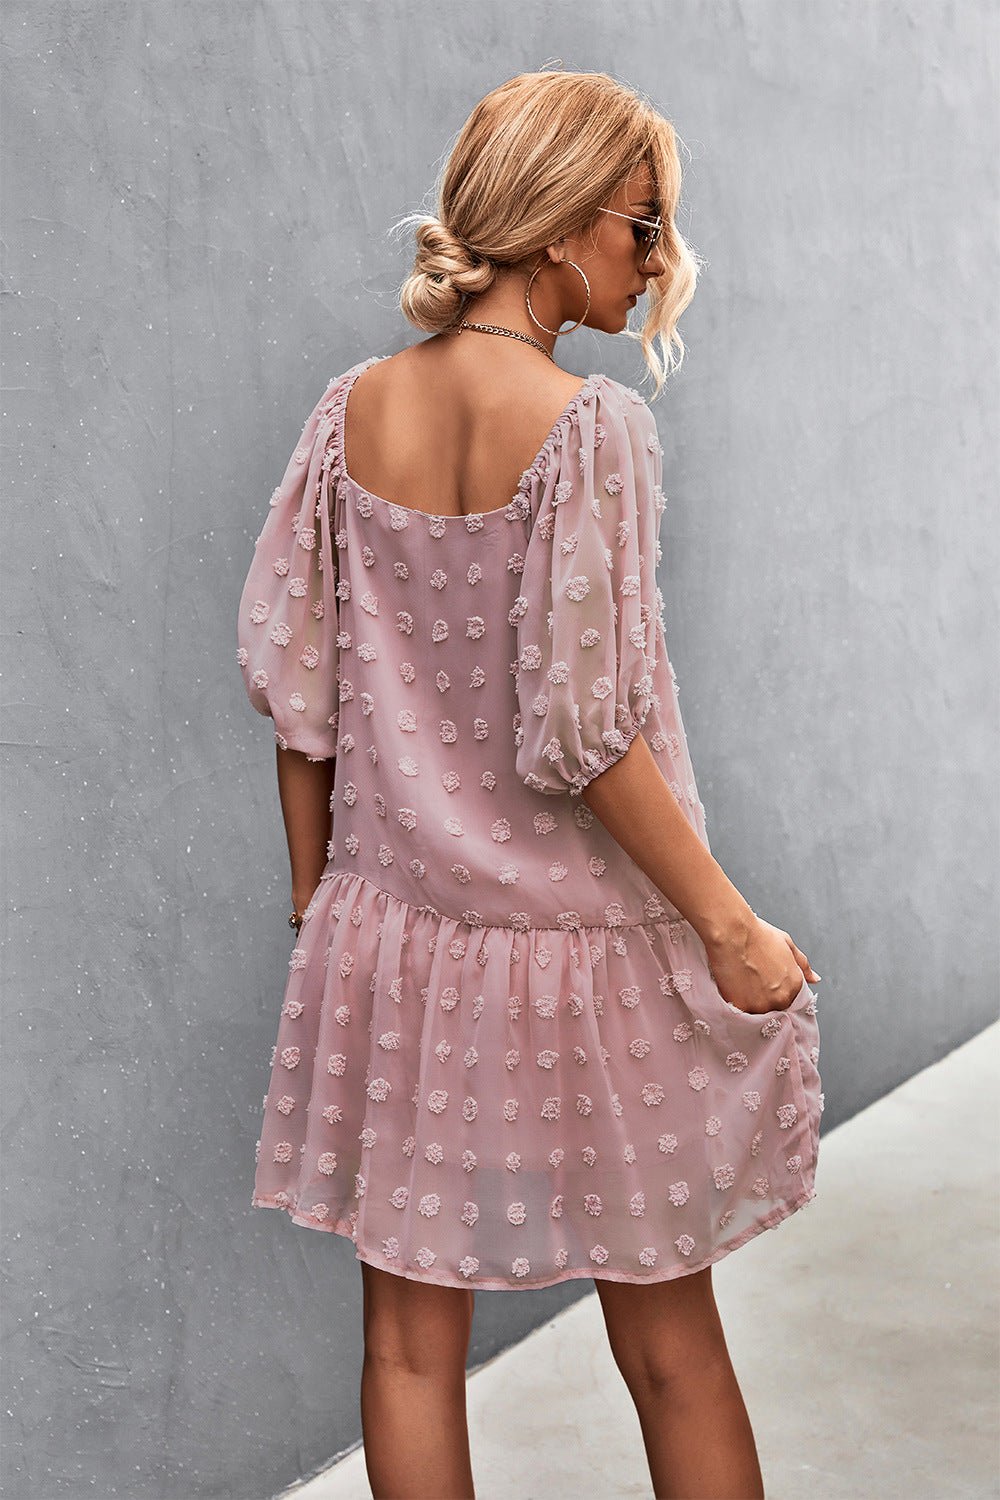 Can’t Help It Lace Mini Dress - pink mini lace dress with Swiss dot fabric, square neck, puff sleeve #Firefly Lane Boutique1